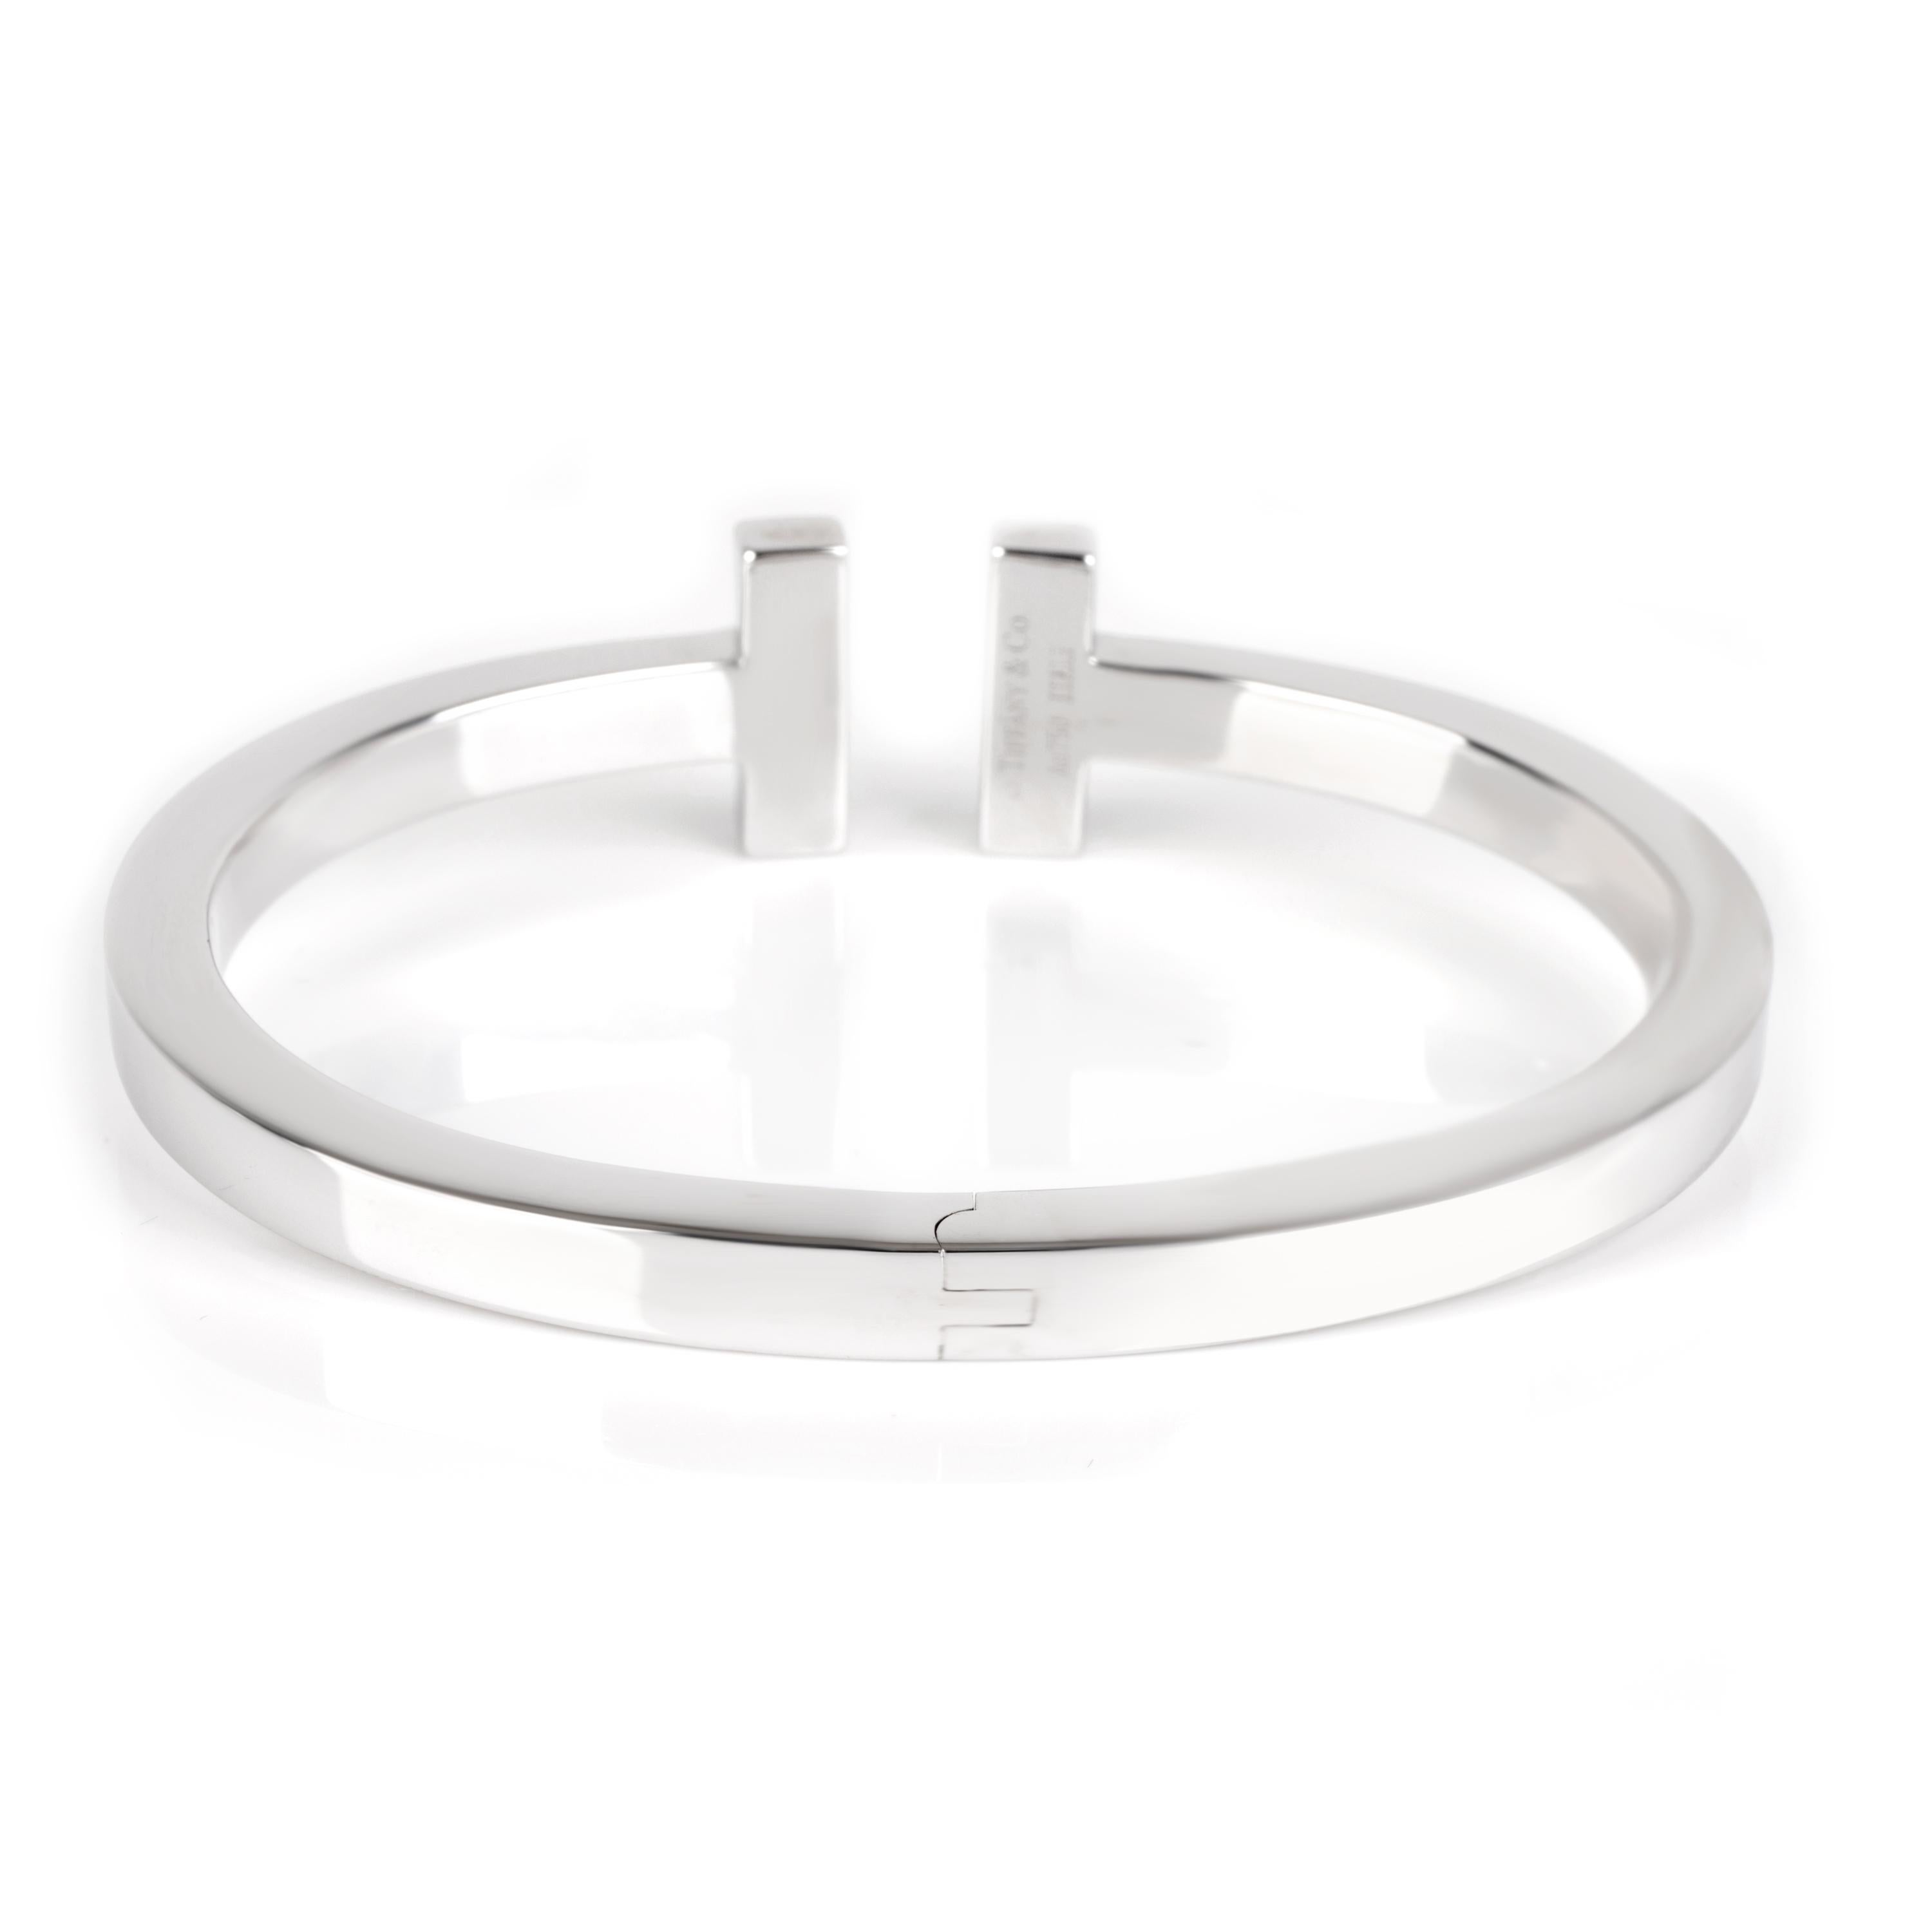 Tiffany & Co. Tiffany T Bangle in 18K White Gold

PRIMARY DETAILS

SKU: 104953

Listing Title: Tiffany & Co. Tiffany T Bangle in 18K White Gold

Condition Description: Retails for 5500 USD. In excellent condition and recently polished. Fits a 6.75